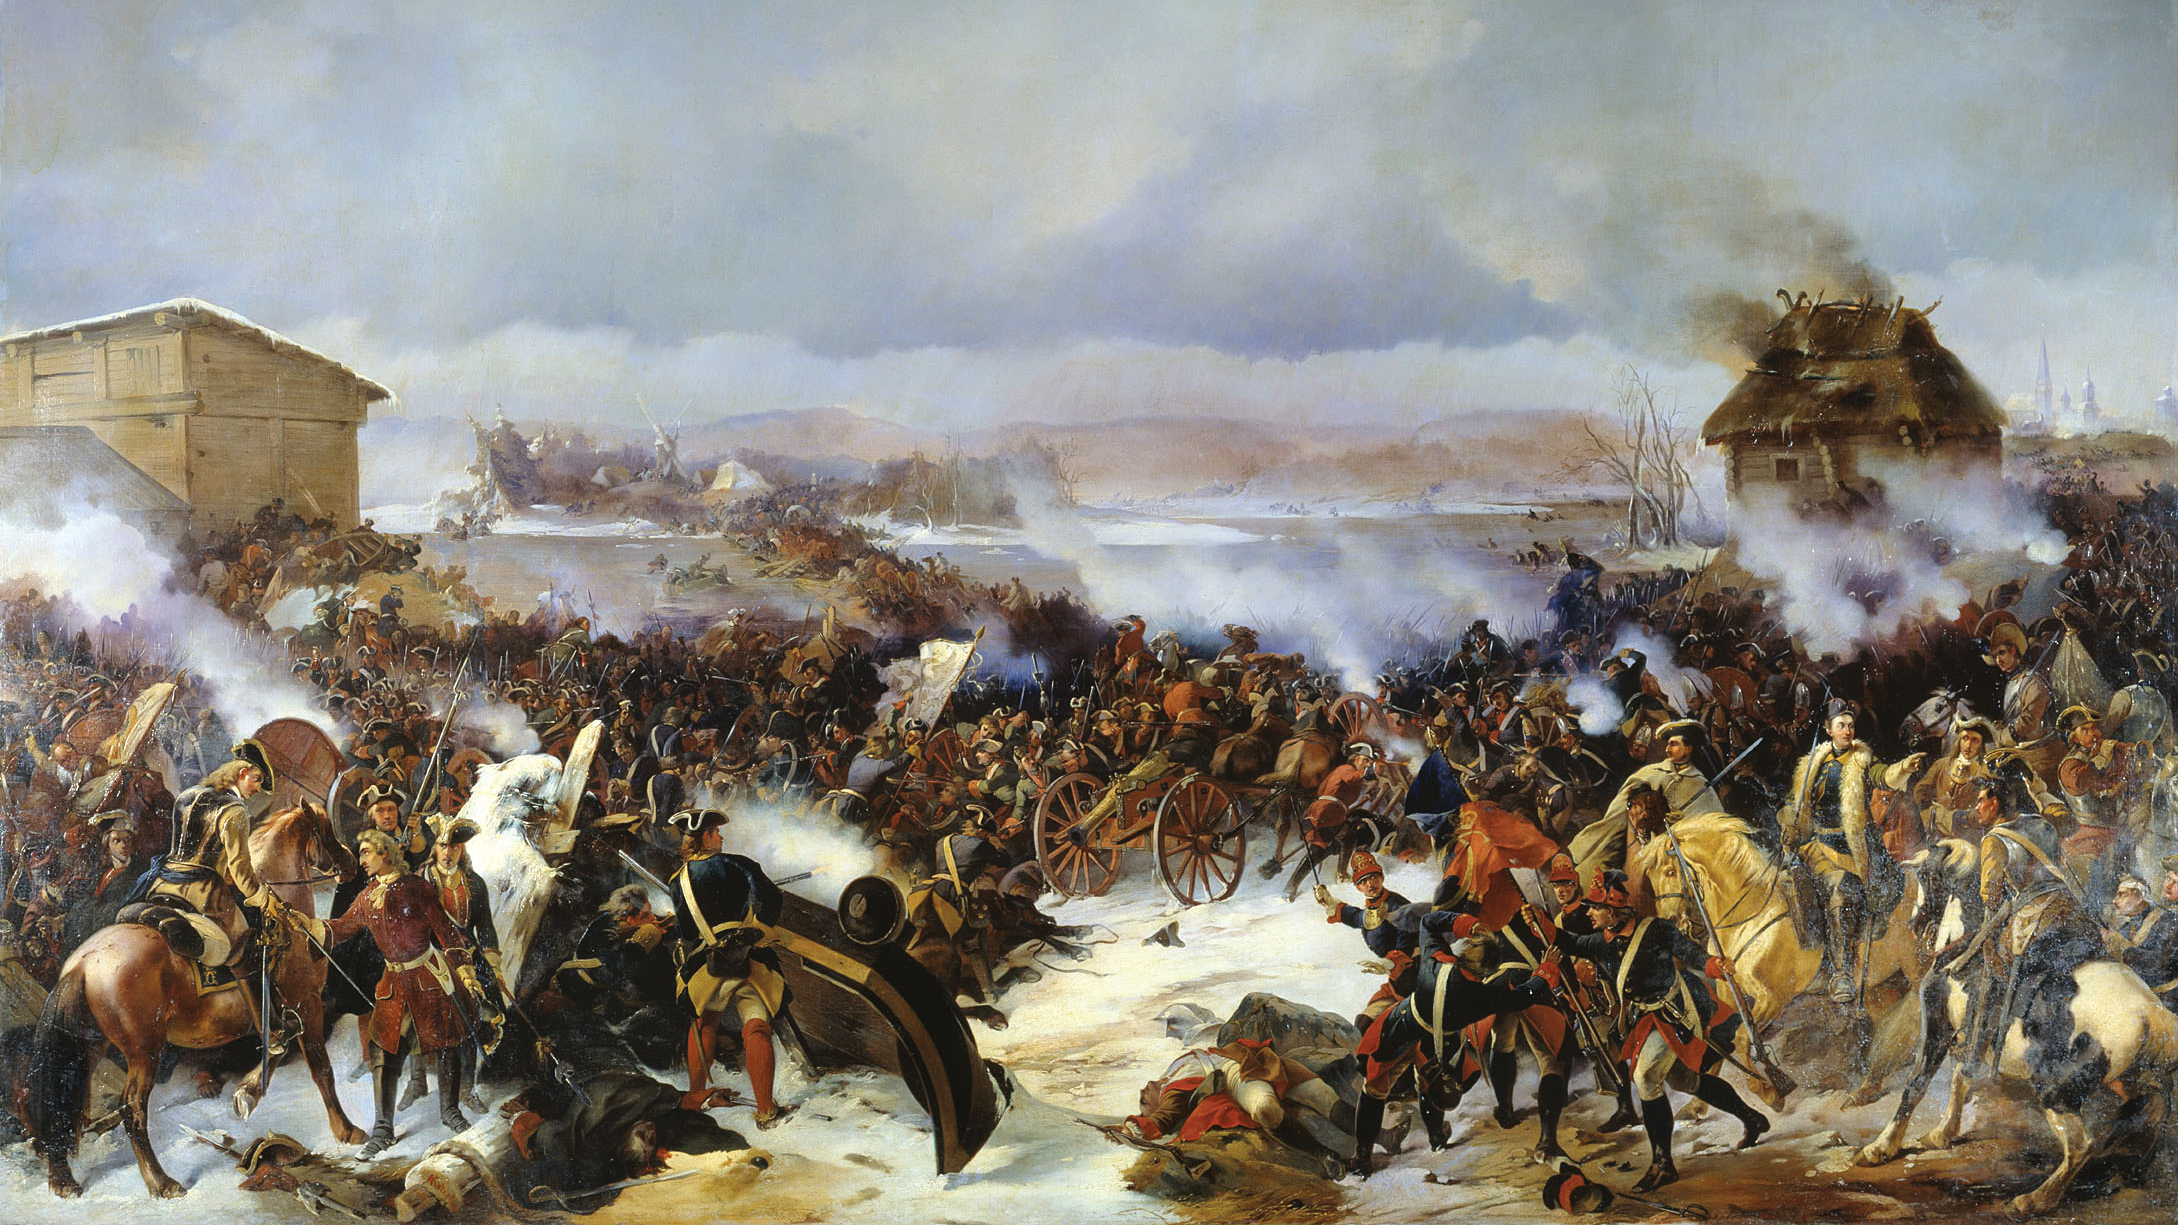 Charles XII crushed the Russians in November 1700 at Narva in Estonia; afterward, he marched against the Poles and Saxons.